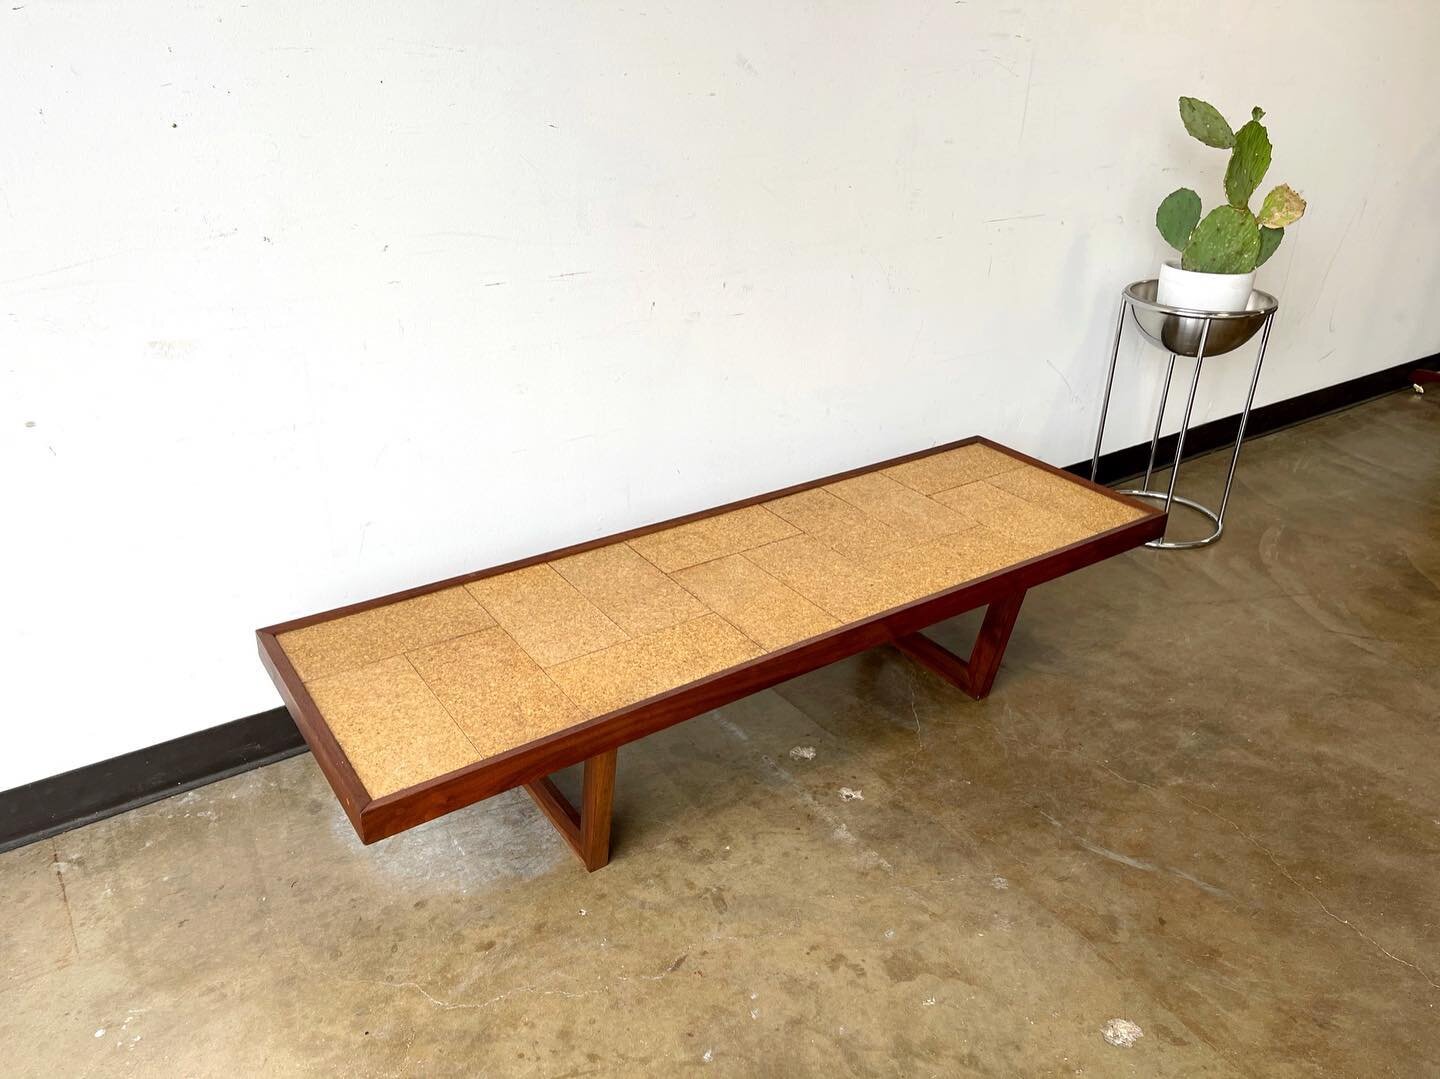 Crushing on this next piece pretty hard! 

Mid Century Modern Cork Tiled + Walnut Coffee Table! Surfboard style at 61.5 long! We love the unique sleigh style legs and tiled pattern on the table top! Tiles are in immaculate condition and minor scuffs/